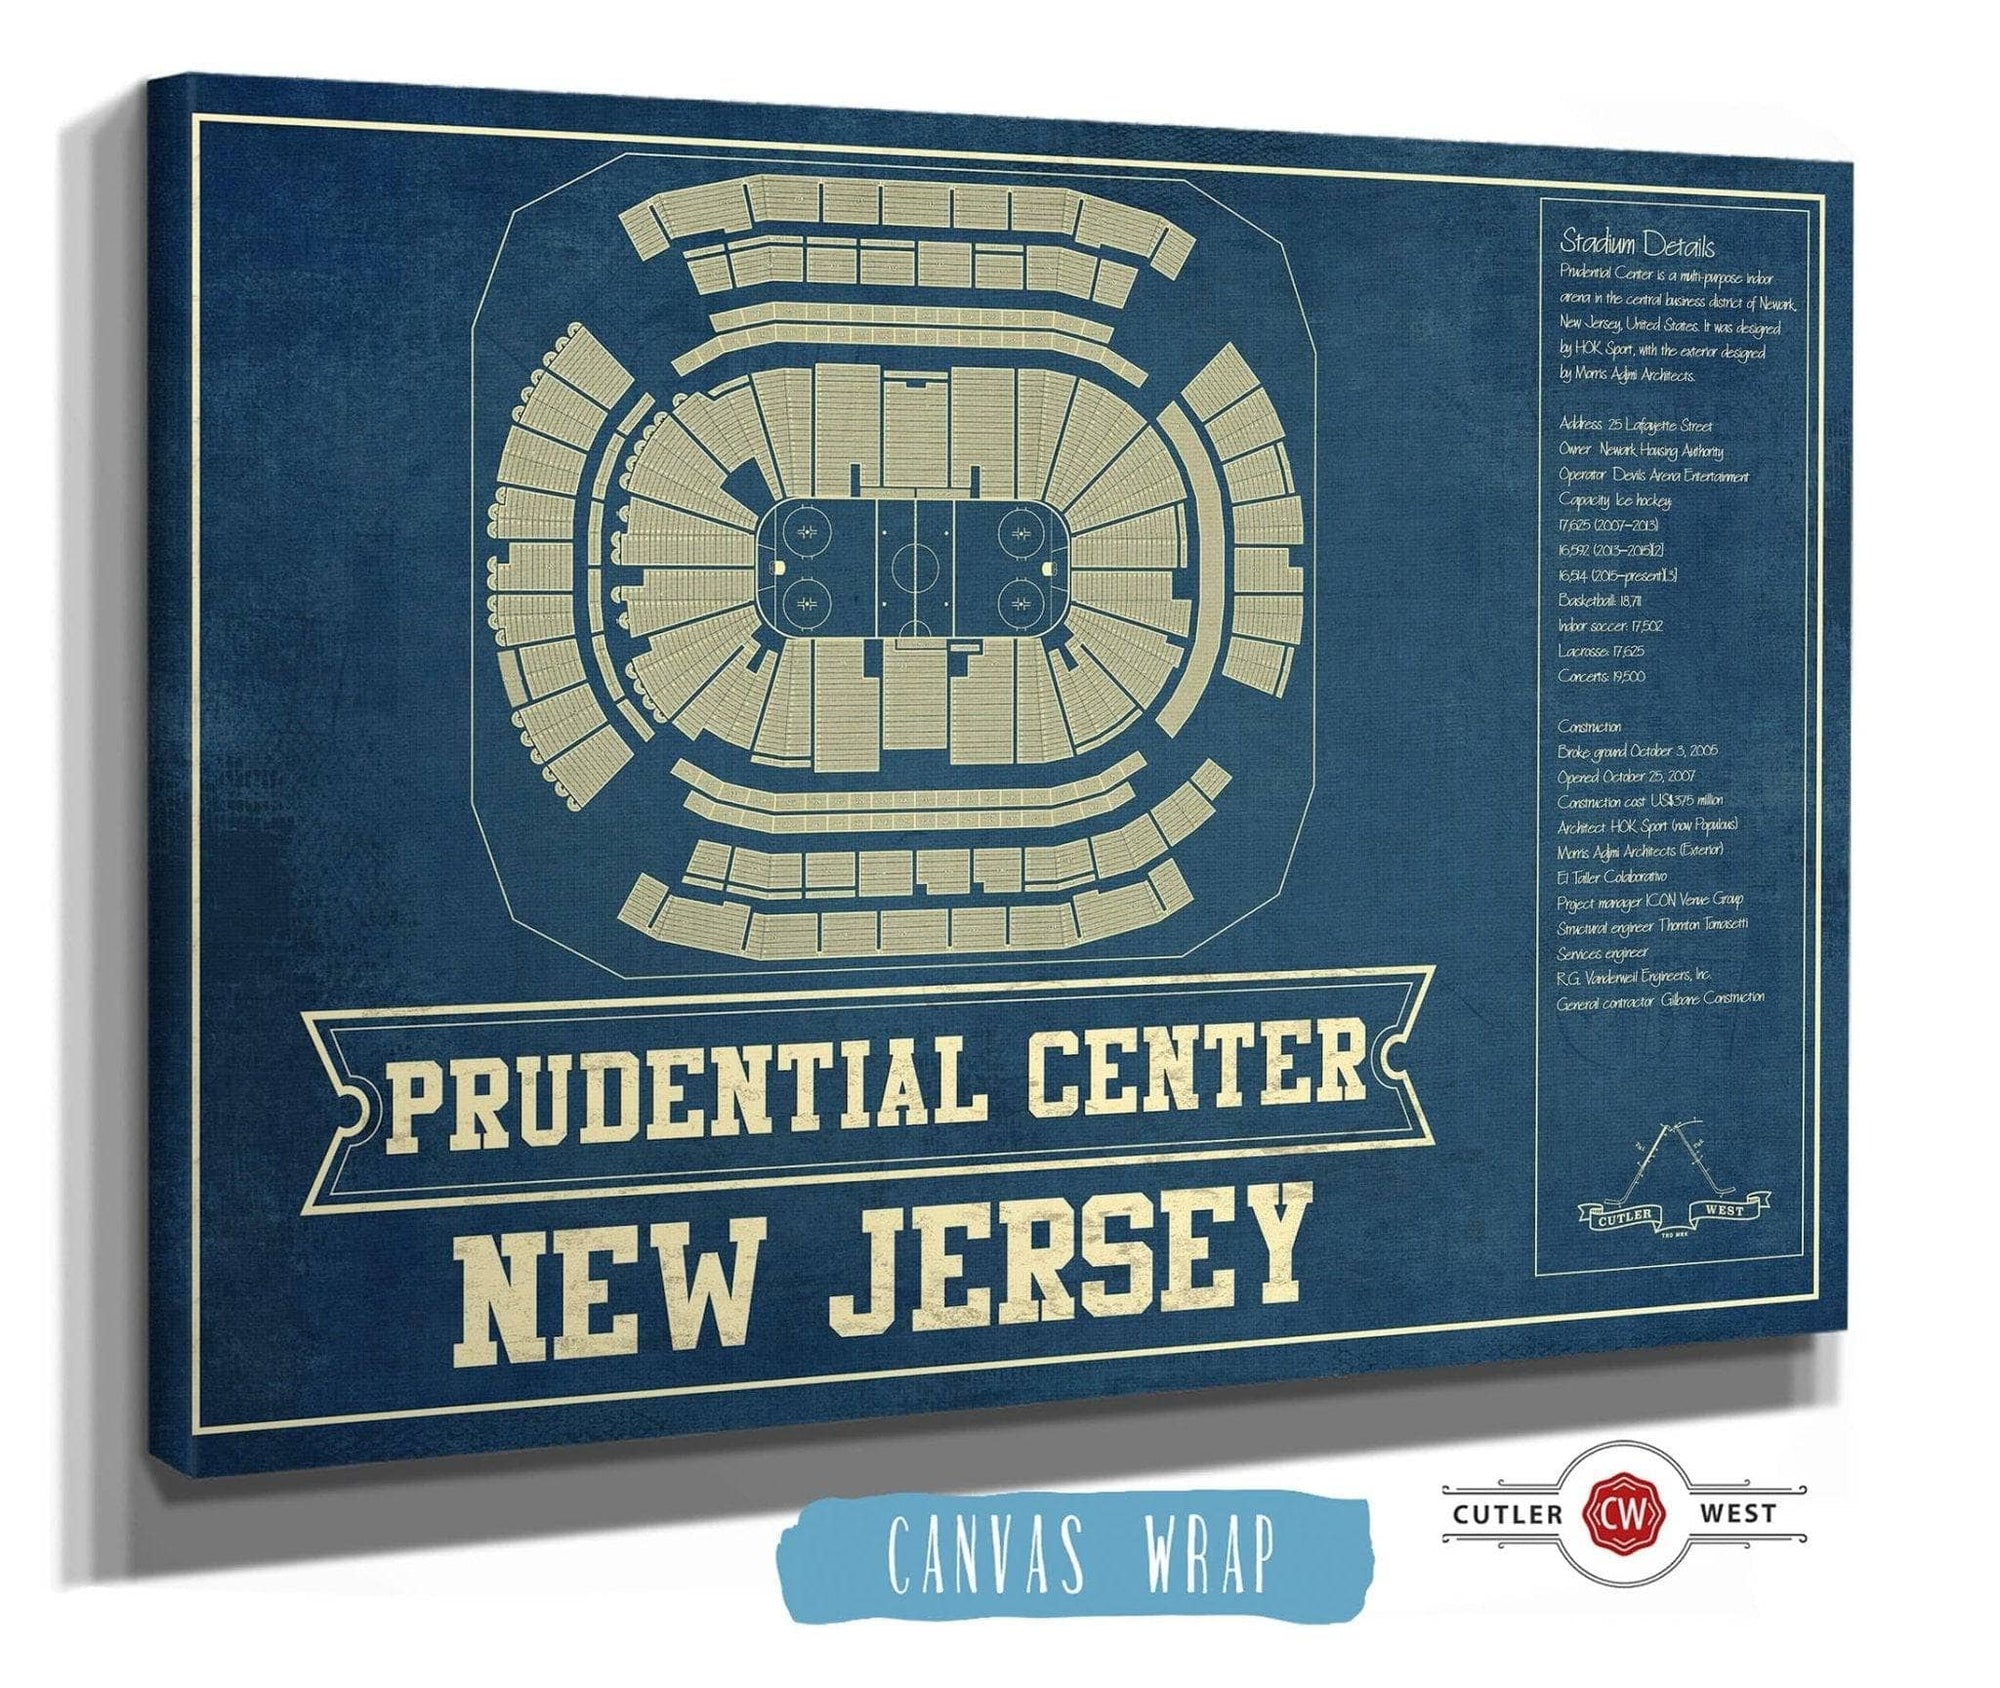 Cutler West 14" x 11" / Stretched Canvas Wrap New Jersey Devils Prudential Center Vintage Hockey Print 933350199_80264